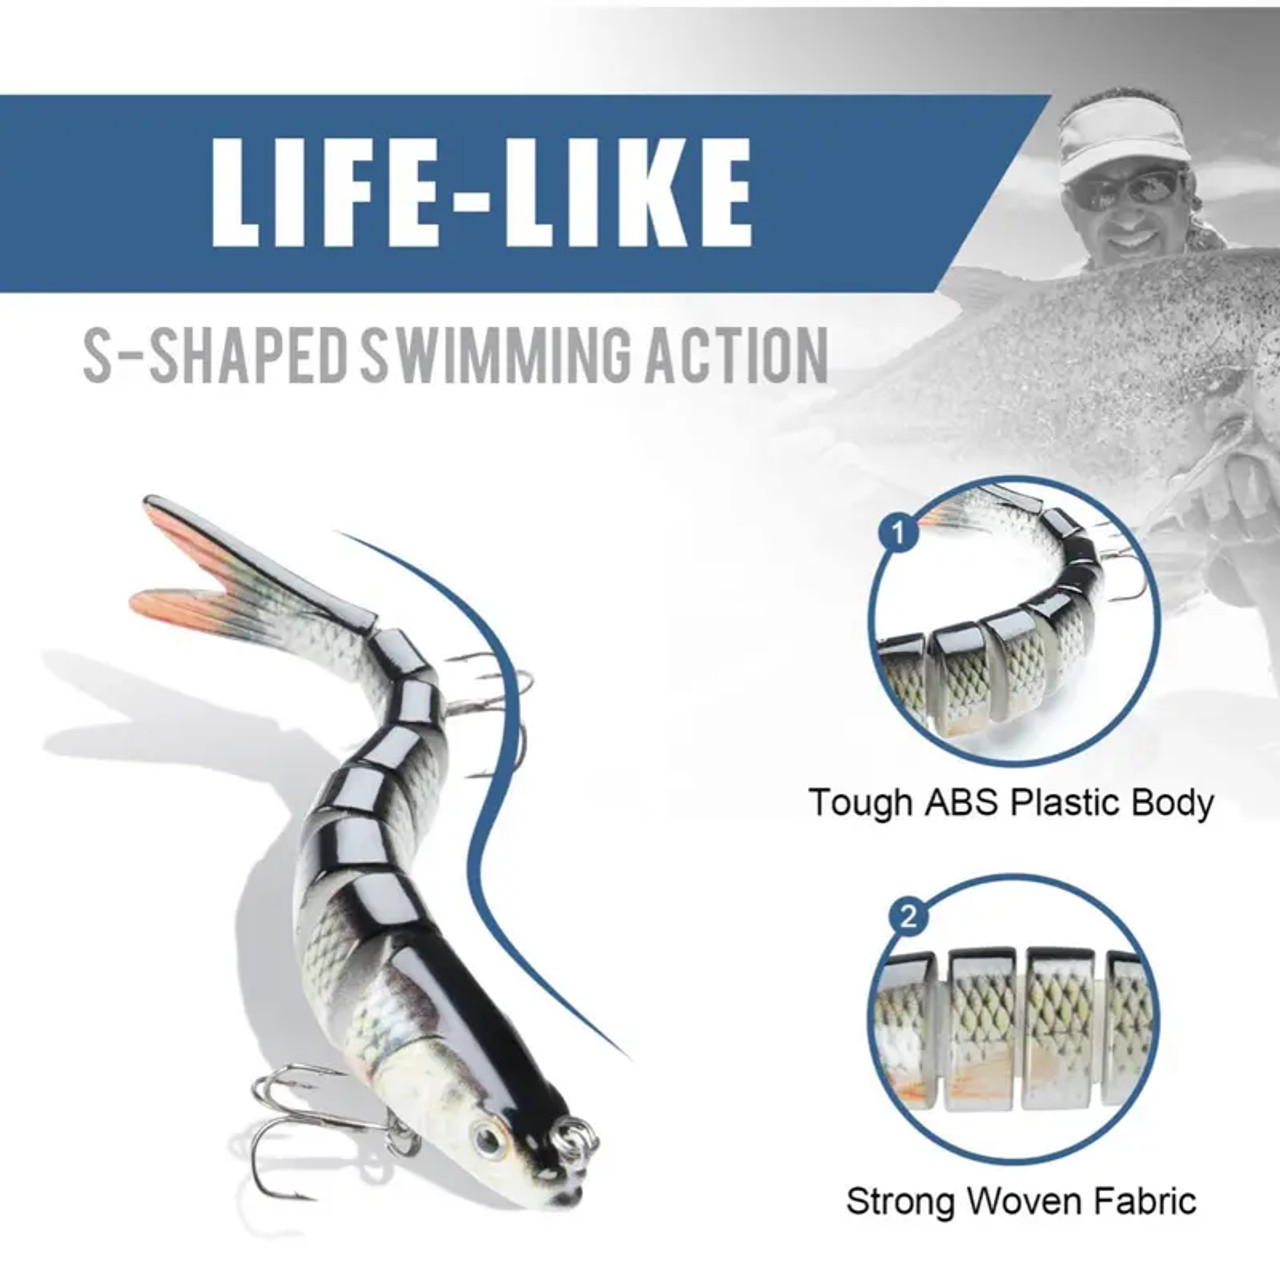 bionic fishing lures, bionic fishing lures Suppliers and